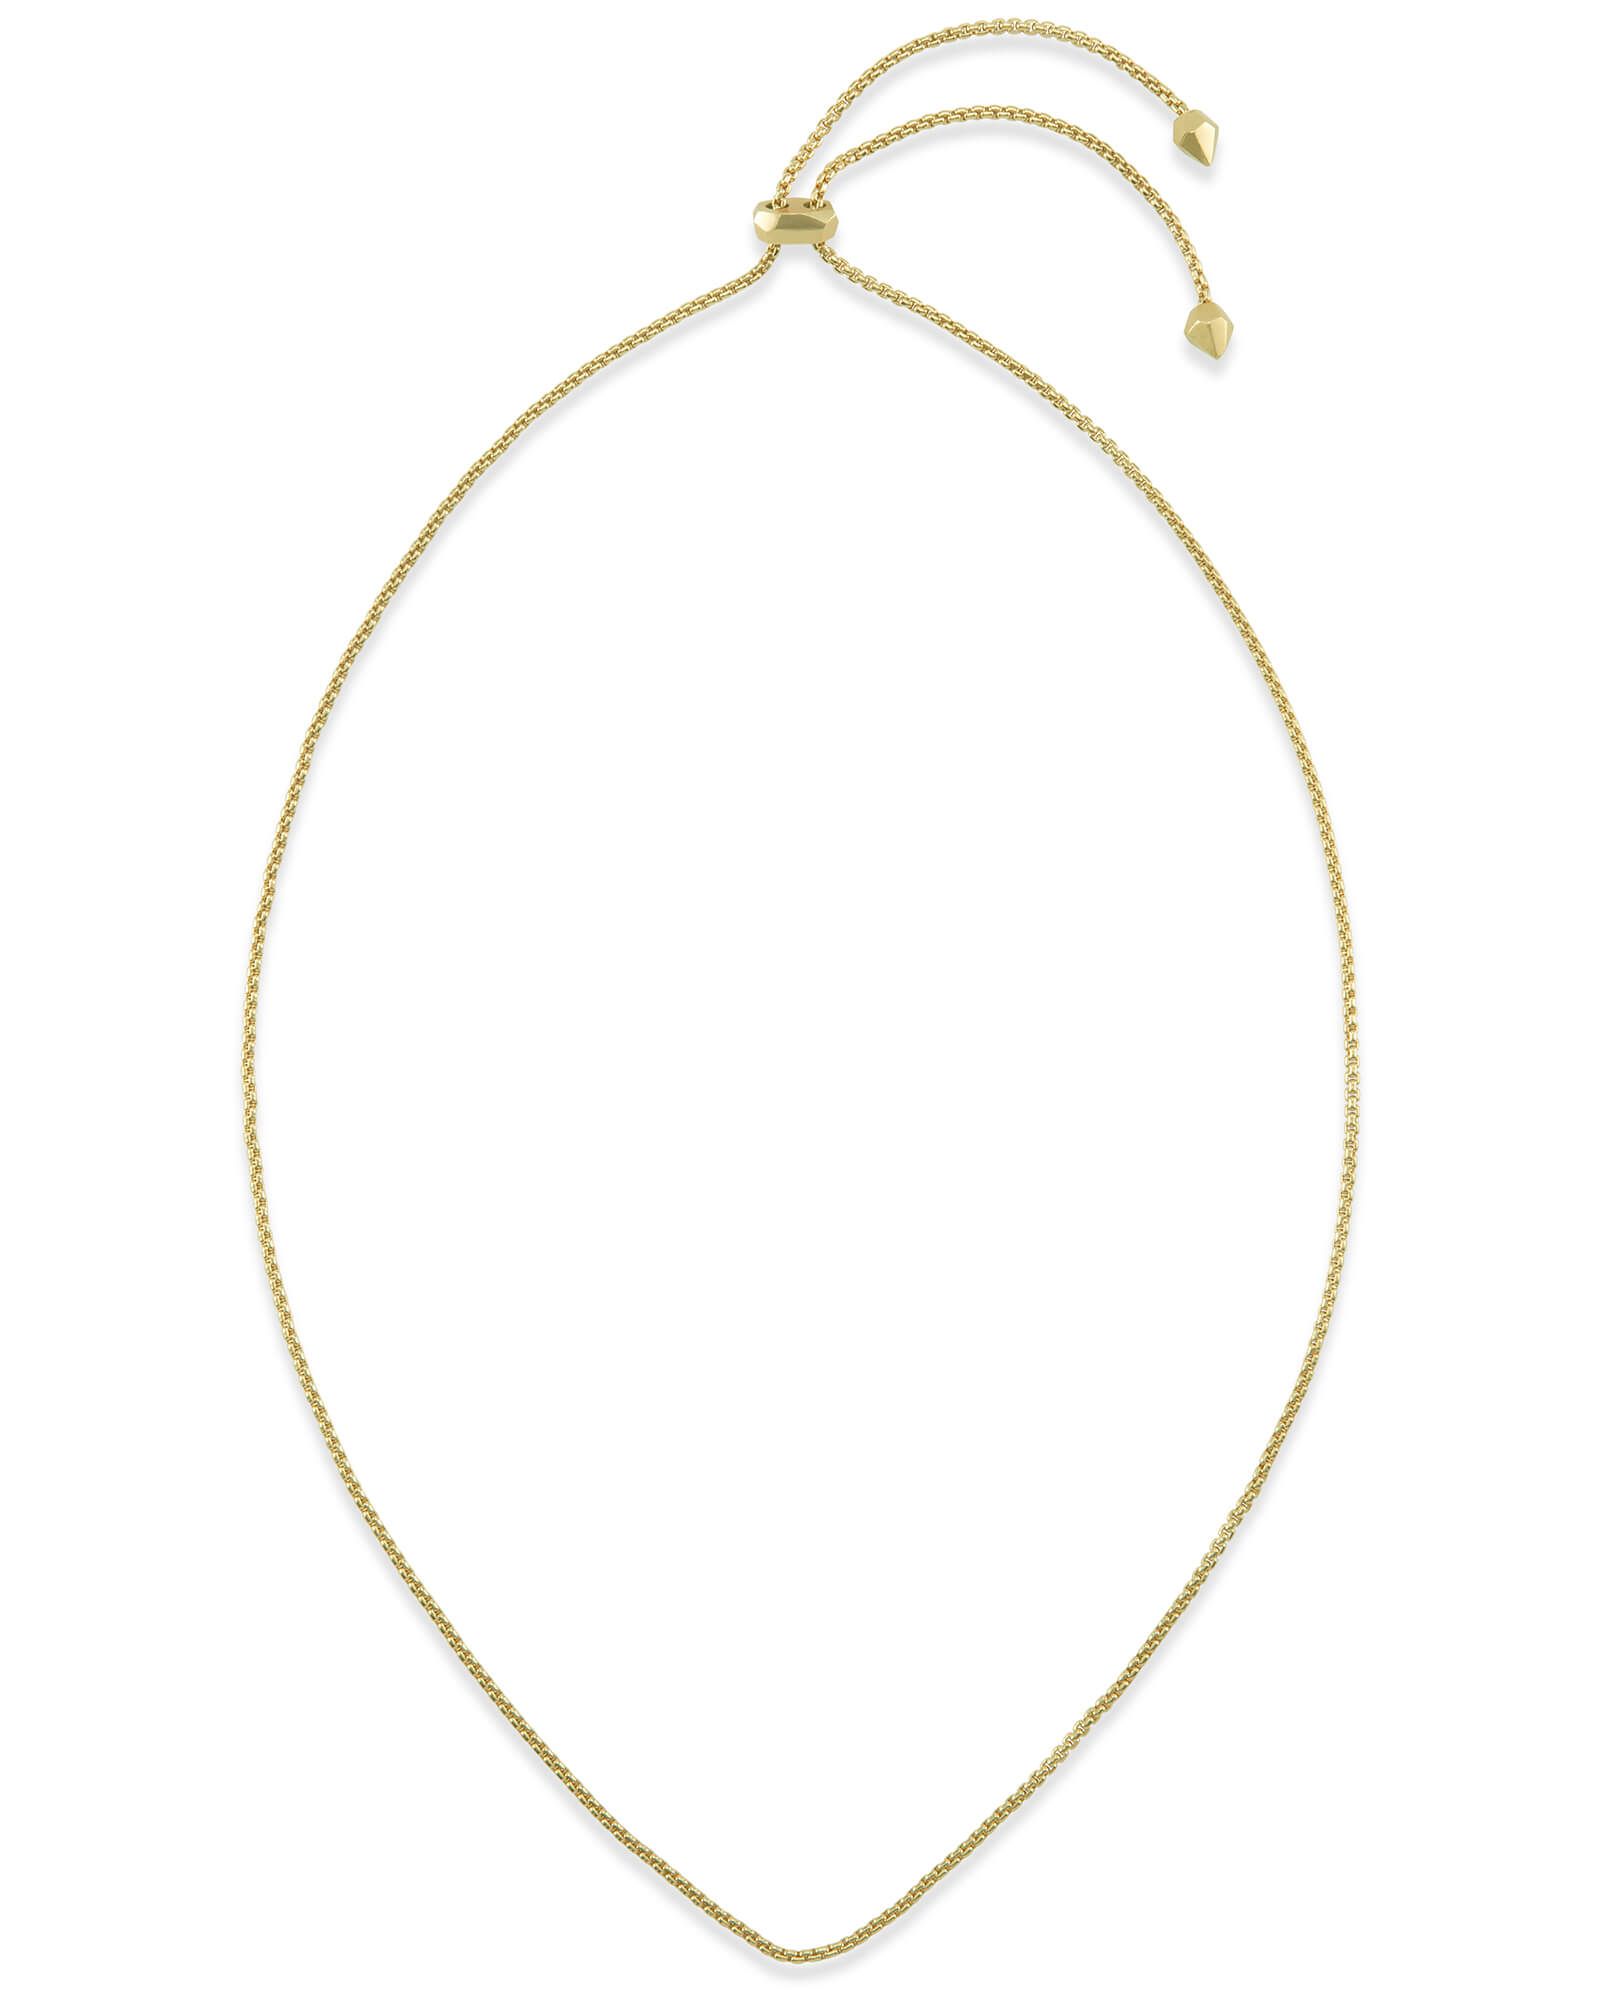 Adjustable Chain Necklace in Gold | Kendra Scott